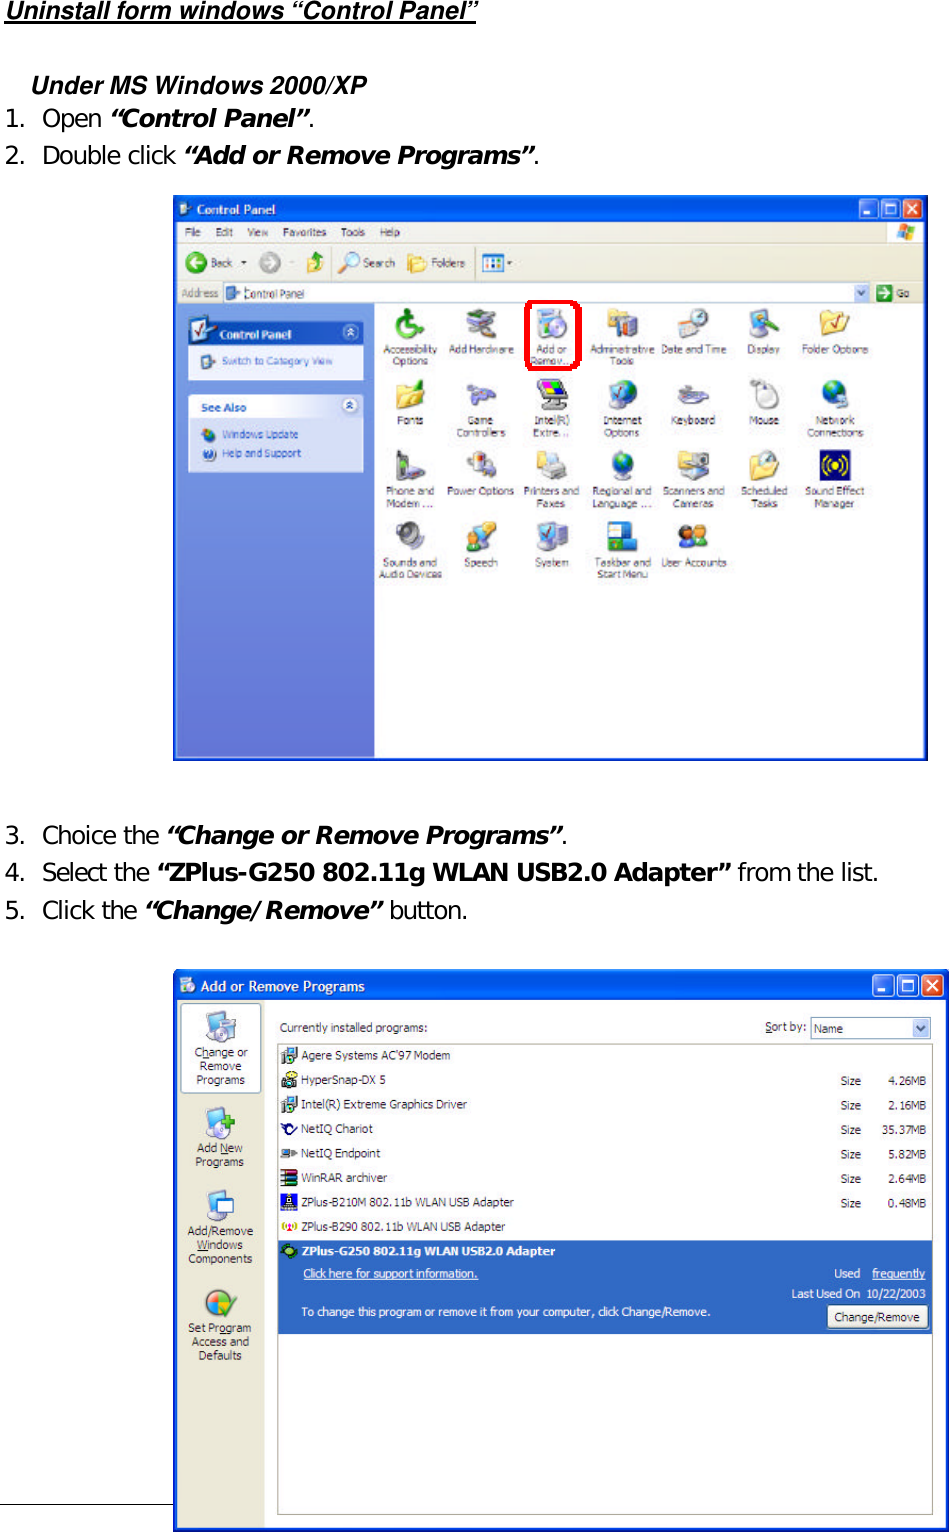  14  Uninstall form windows “Control Panel”  Under MS Windows 2000/XP 1. Open “Control Panel”. 2. Double click “Add or Remove Programs”.                  3. Choice the “Change or Remove Programs”. 4. Select the “ZPlus-G250 802.11g WLAN USB2.0 Adapter” from the list. 5. Click the “Change/Remove” button.               